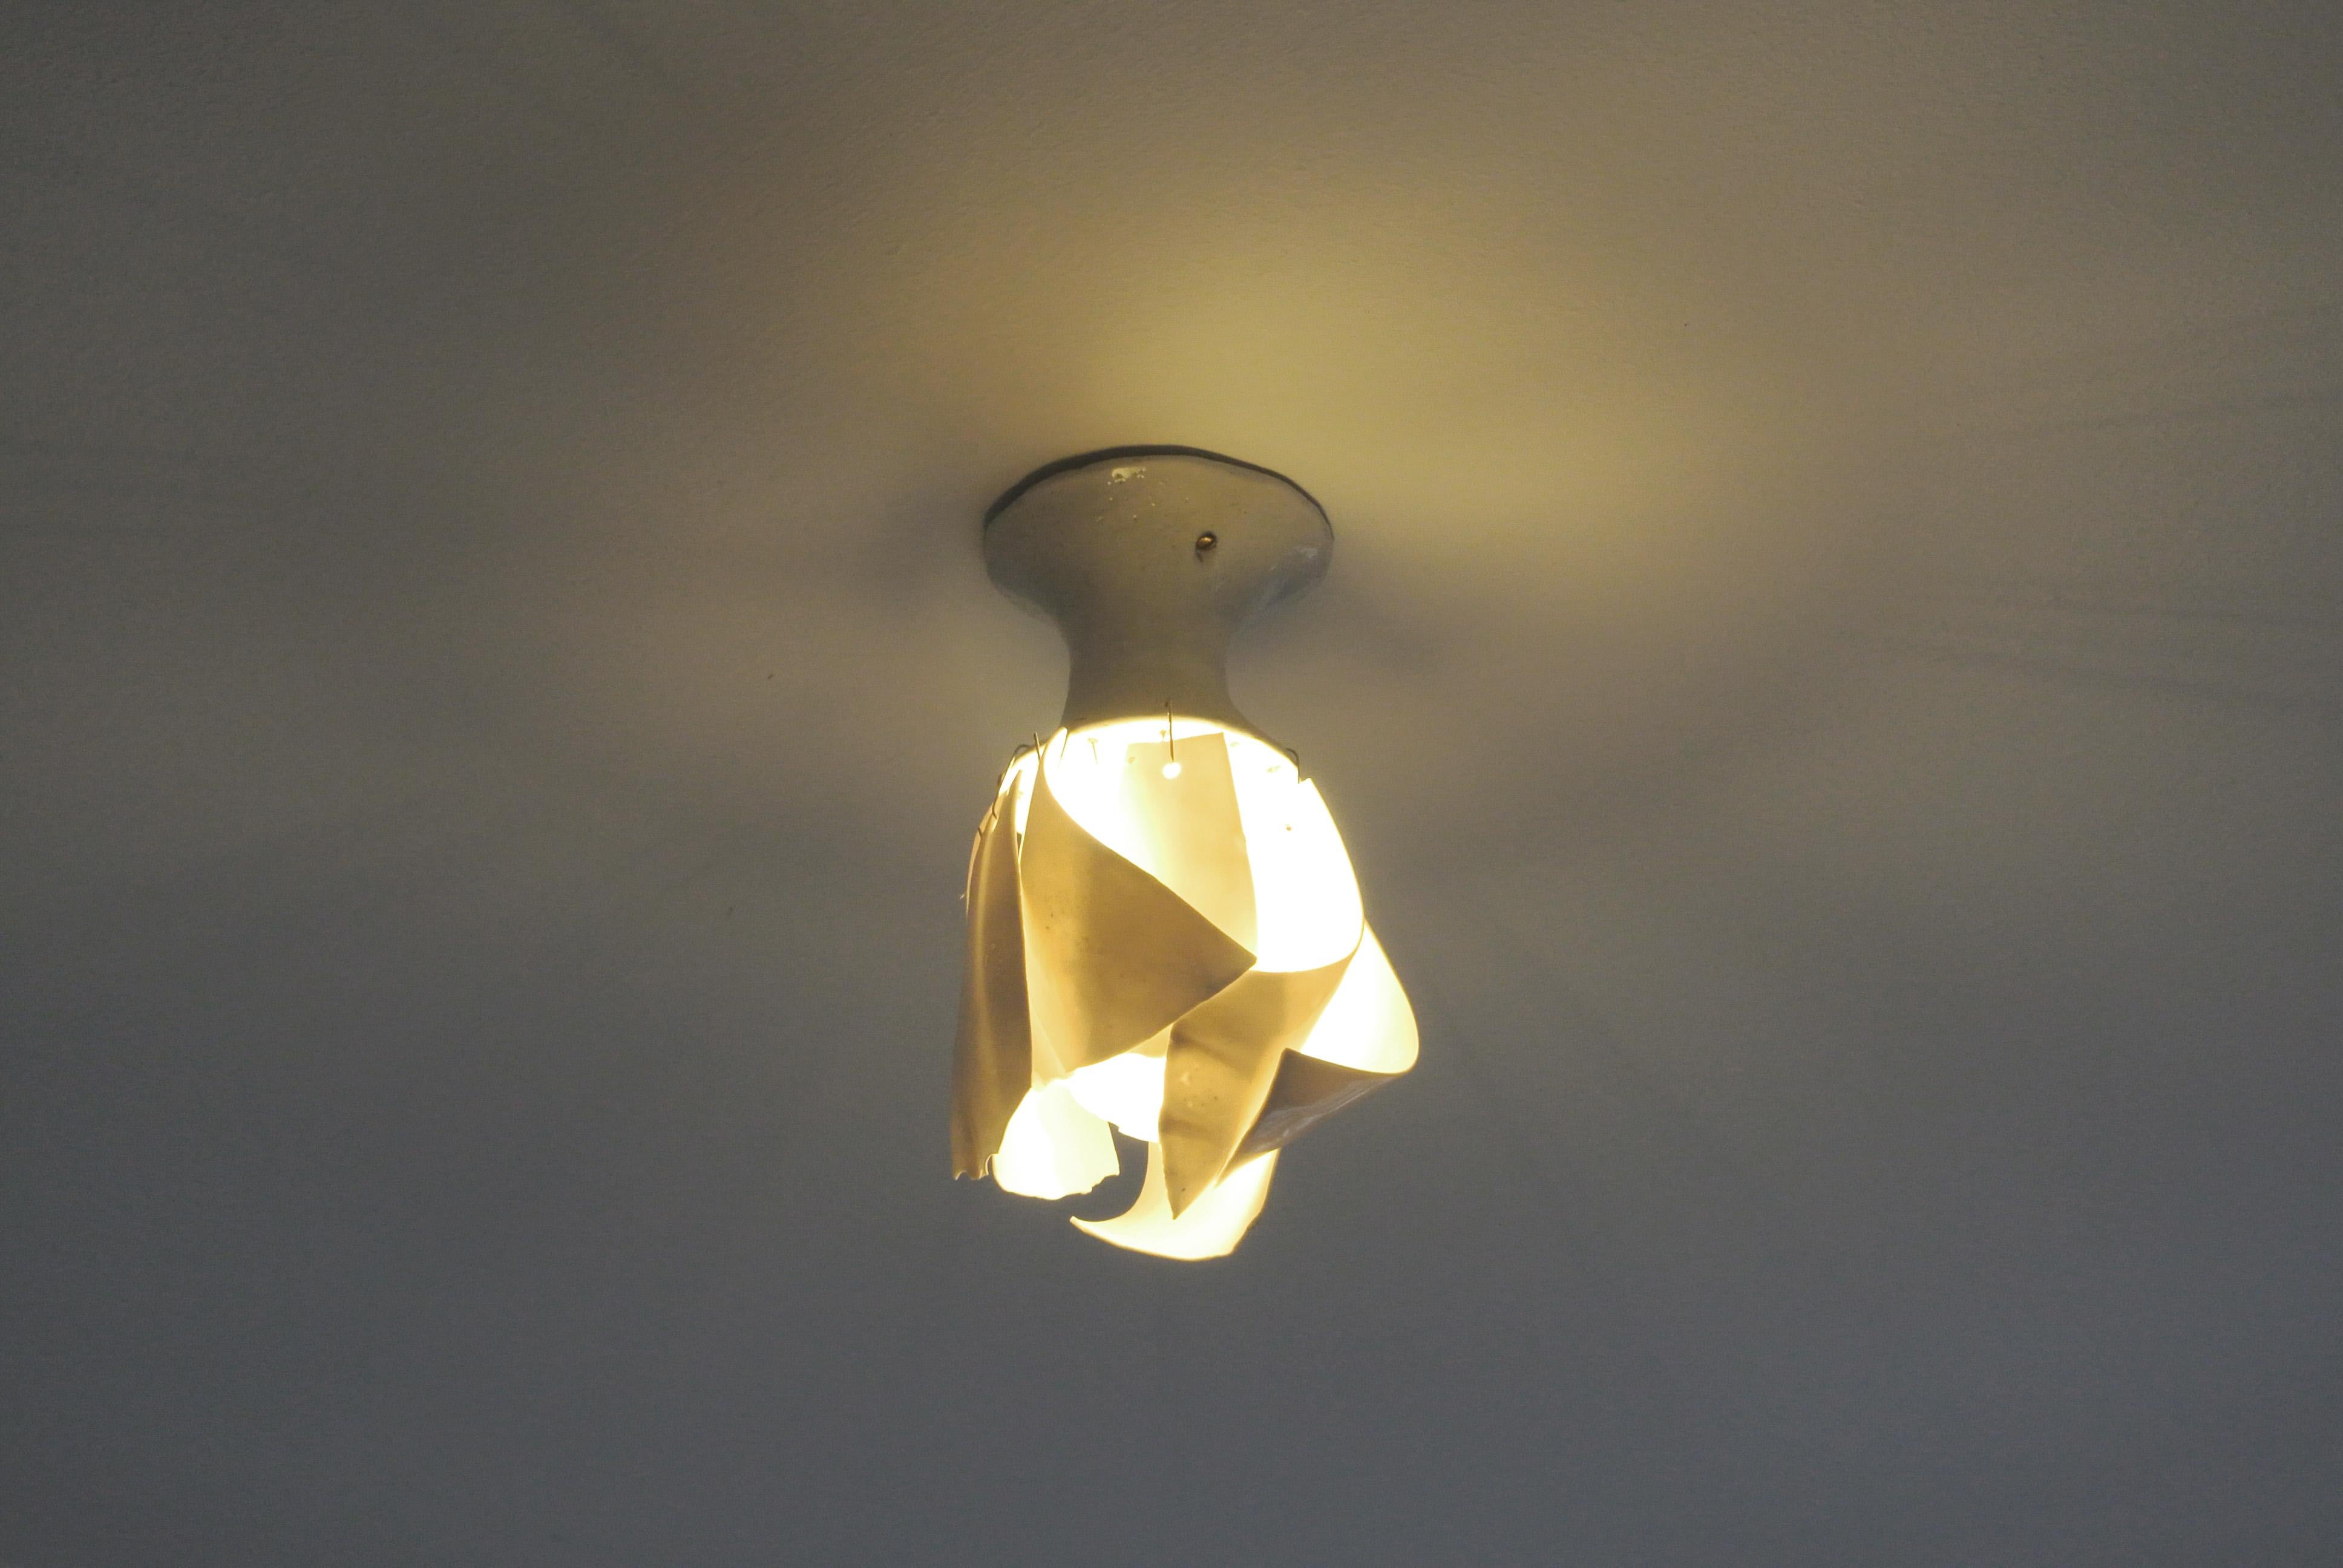 Hand build porcelain lamp fixture with glossy white glaze. White porcelain petals hang from metal hooks attached to the fixture, these are not permanently fixed.
The petals surround the light bulb in a rounded, asymmetric shape.
This ceiling lamp